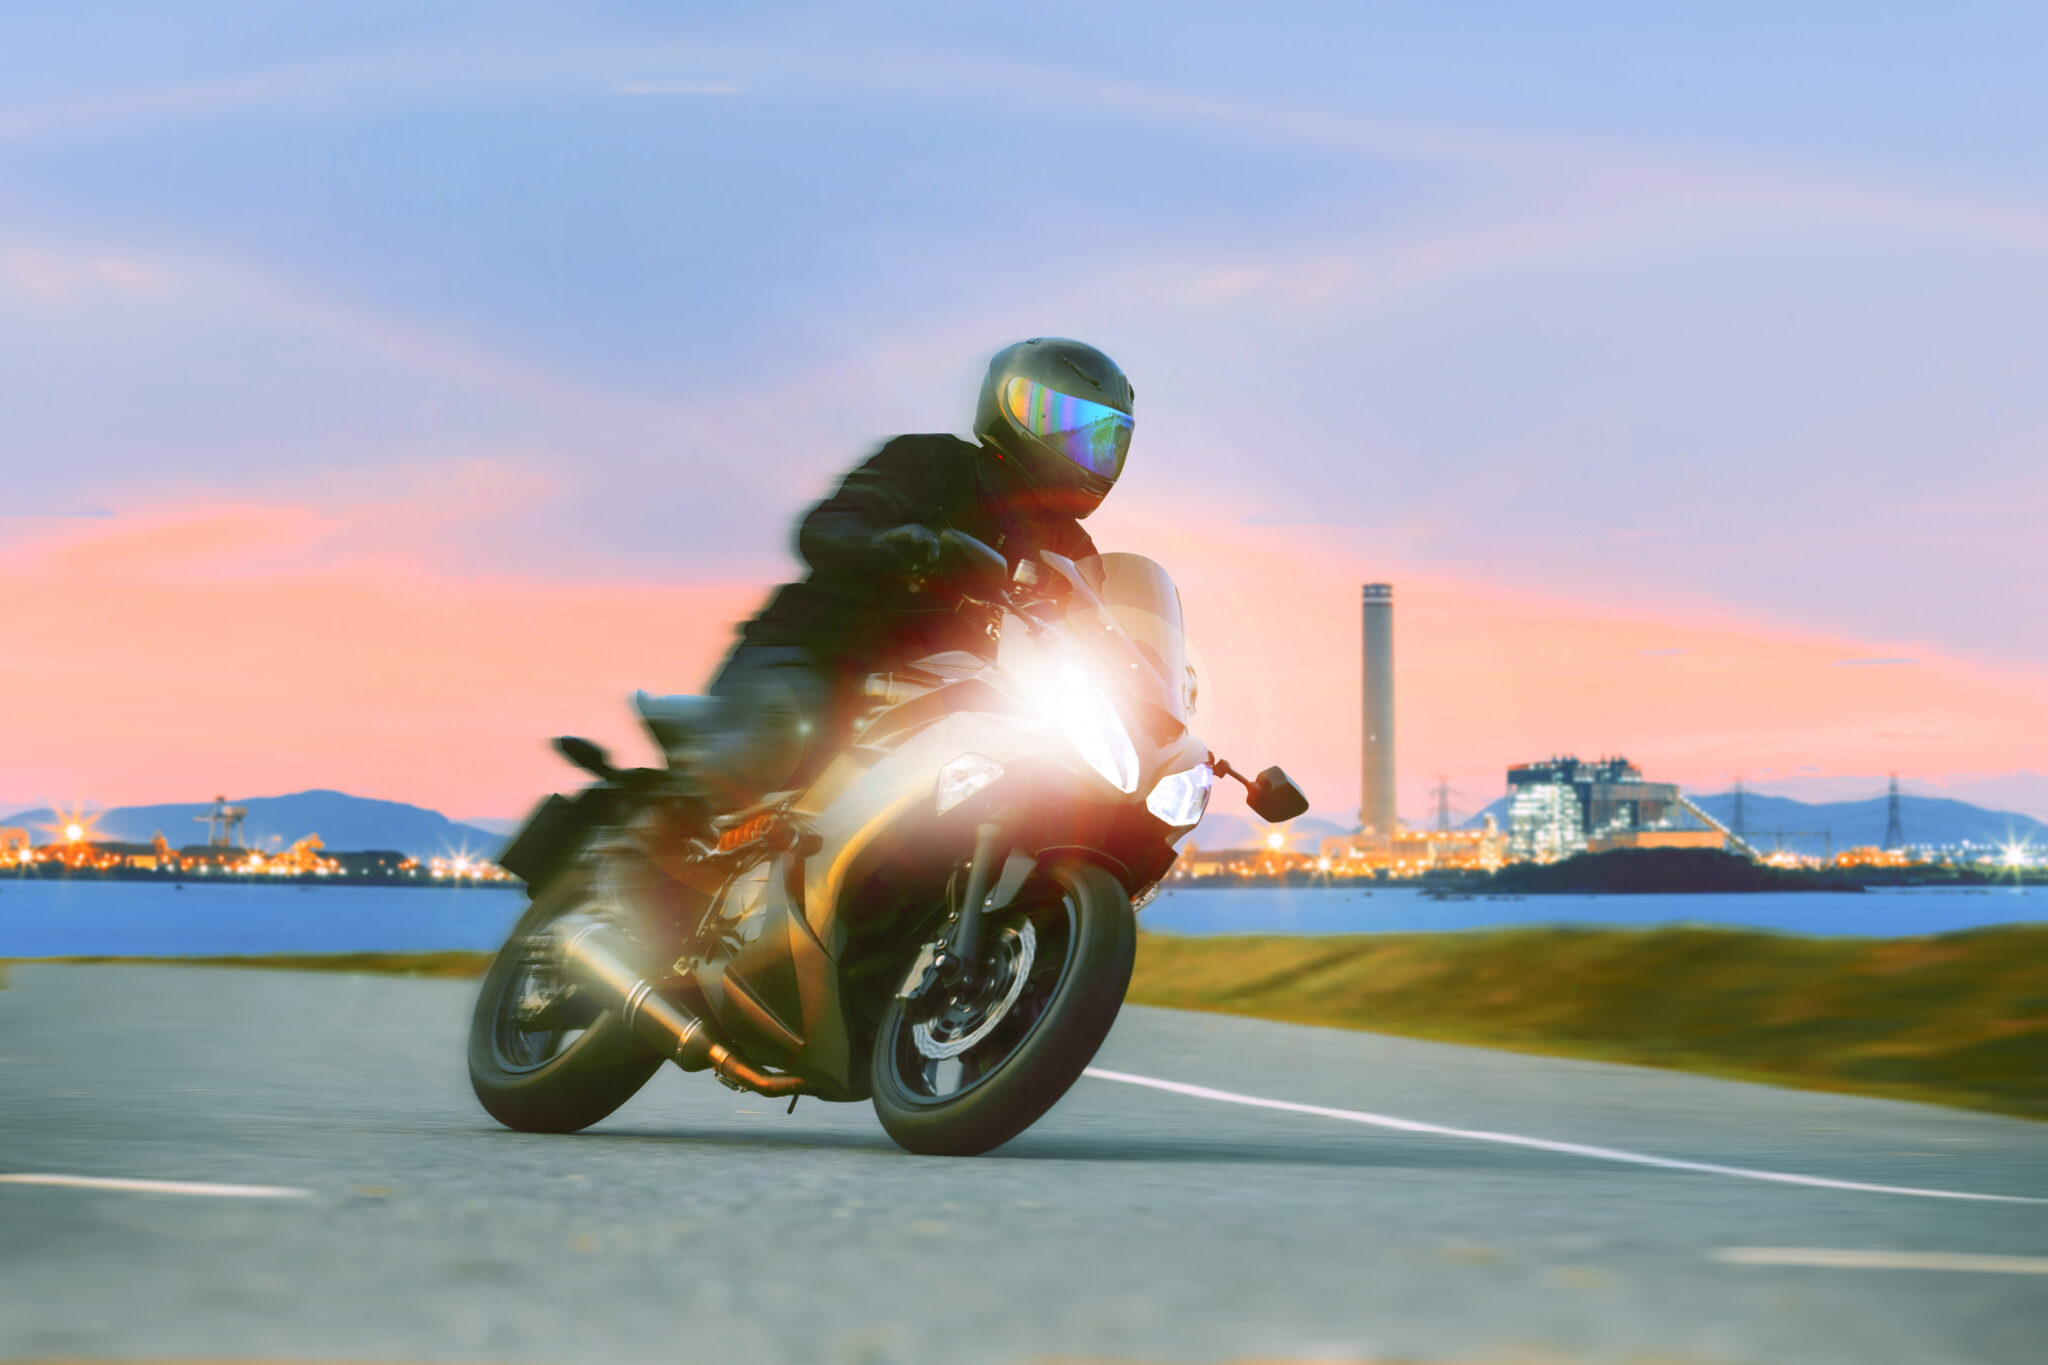 Motorcycle Insurance For New Riders: The Best Coverage and Companies